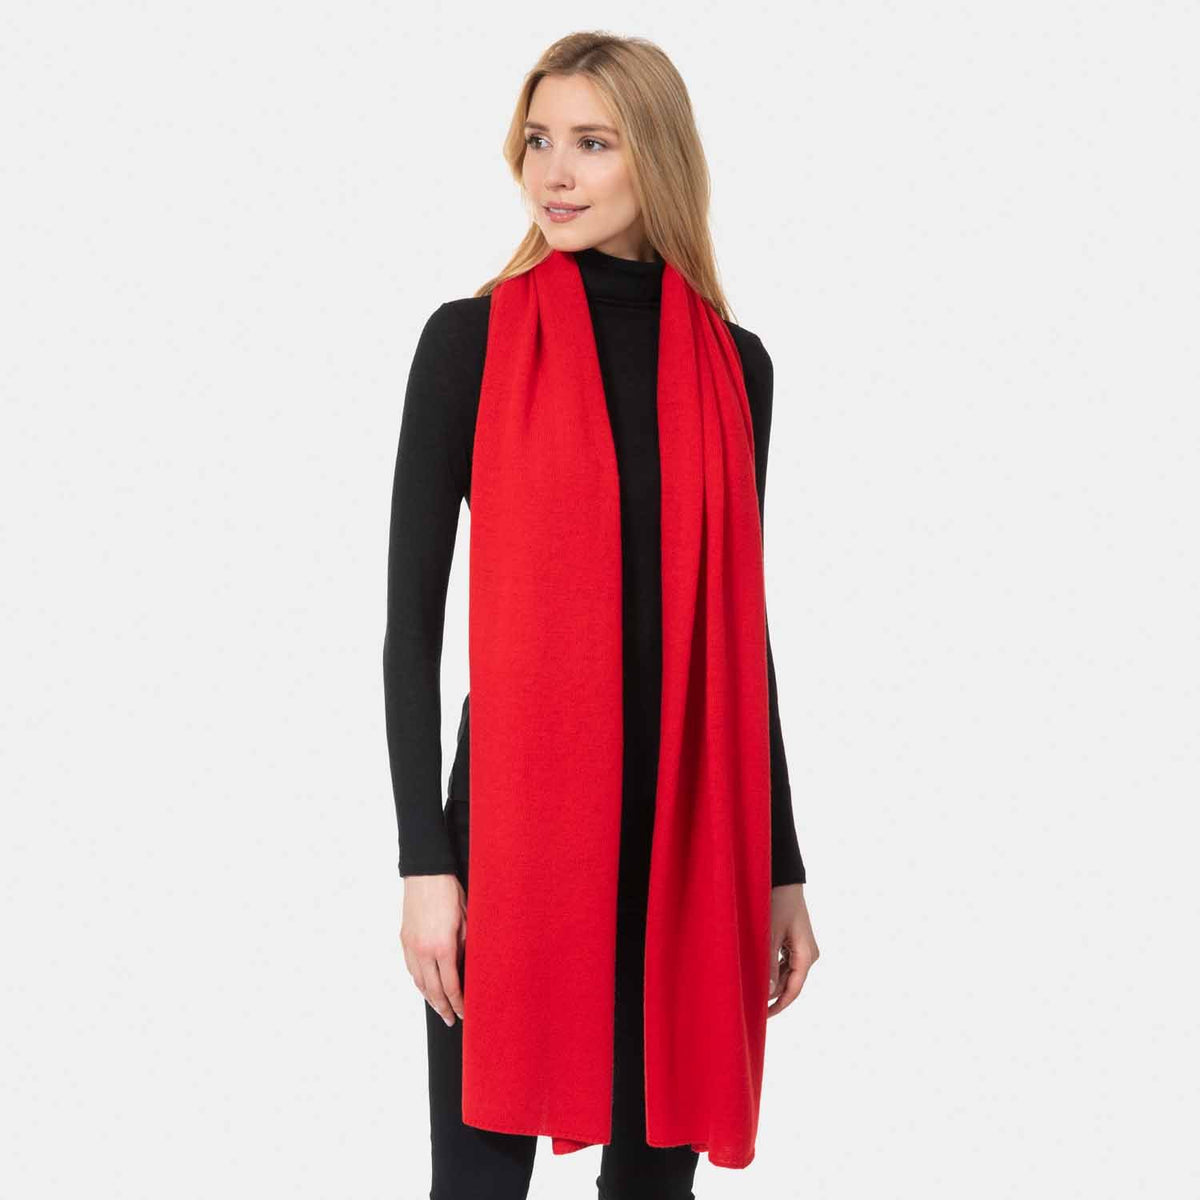 Picture of a woman wearing a red cashmere jersey knitted oversize scarf or travel wrap.